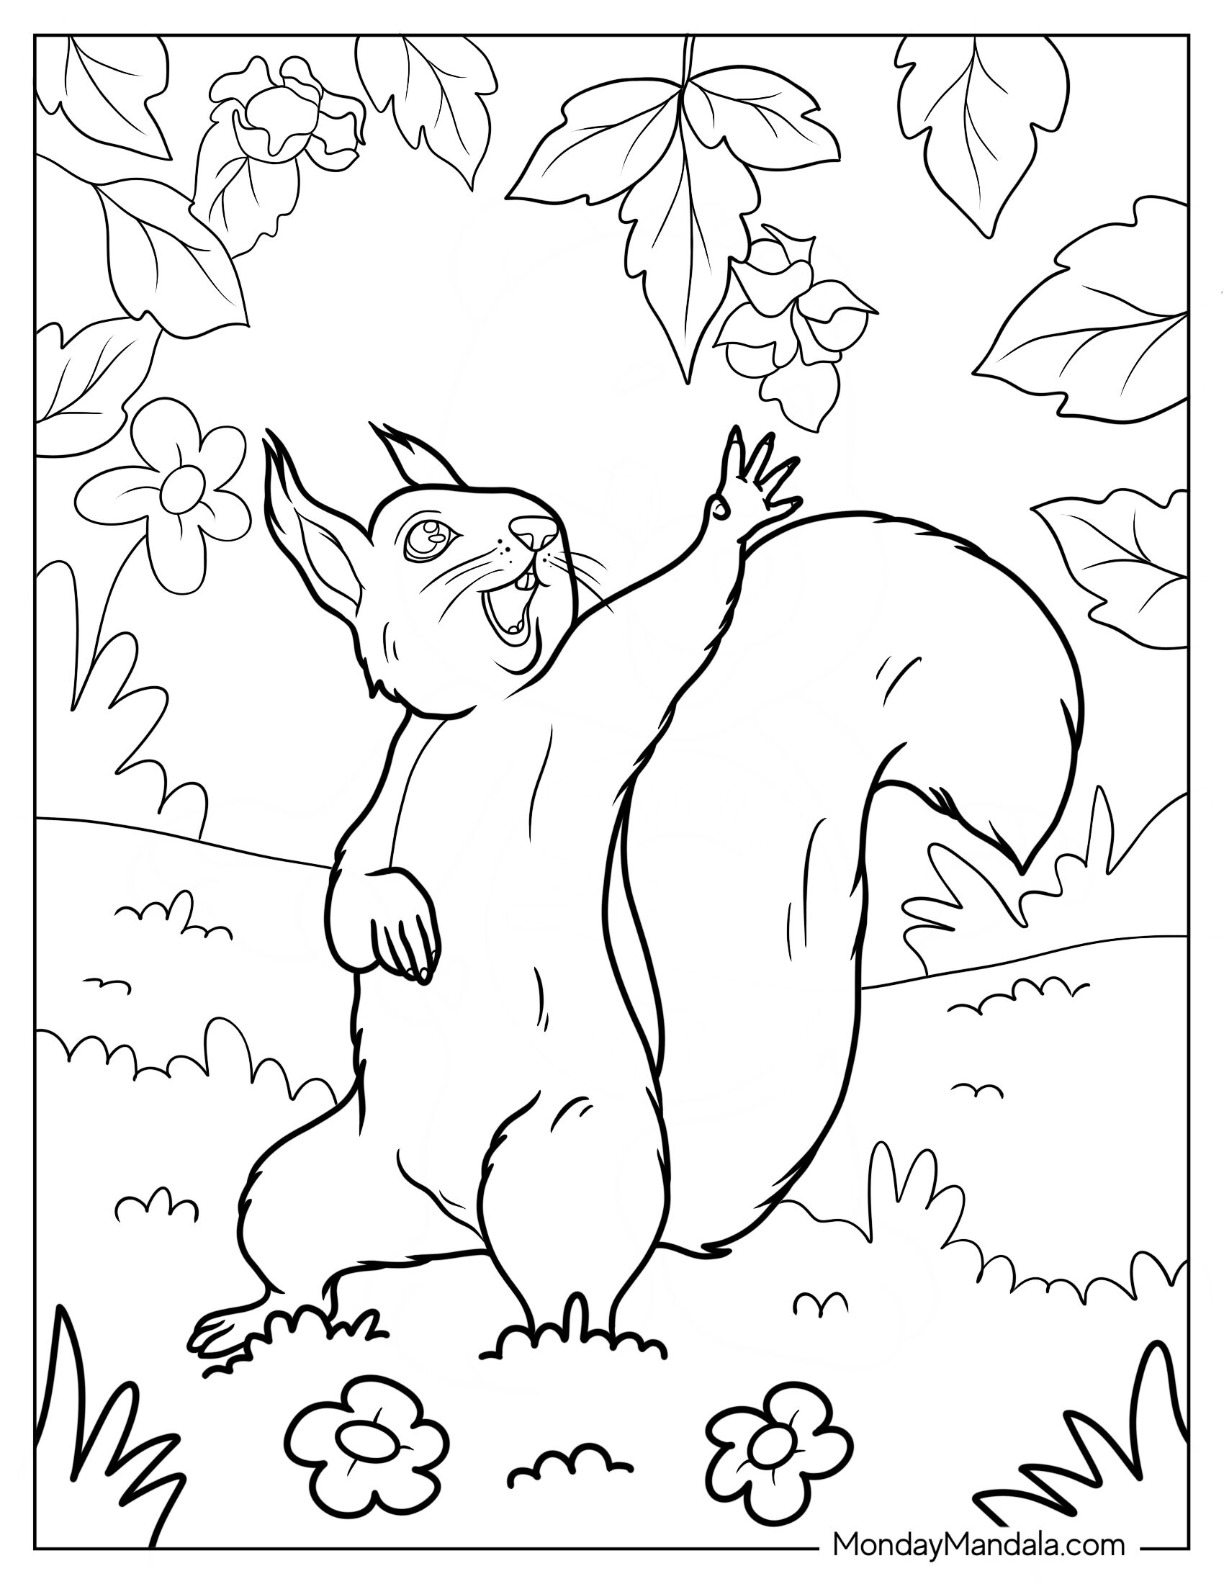 Squirrel coloring pages free pdf printables